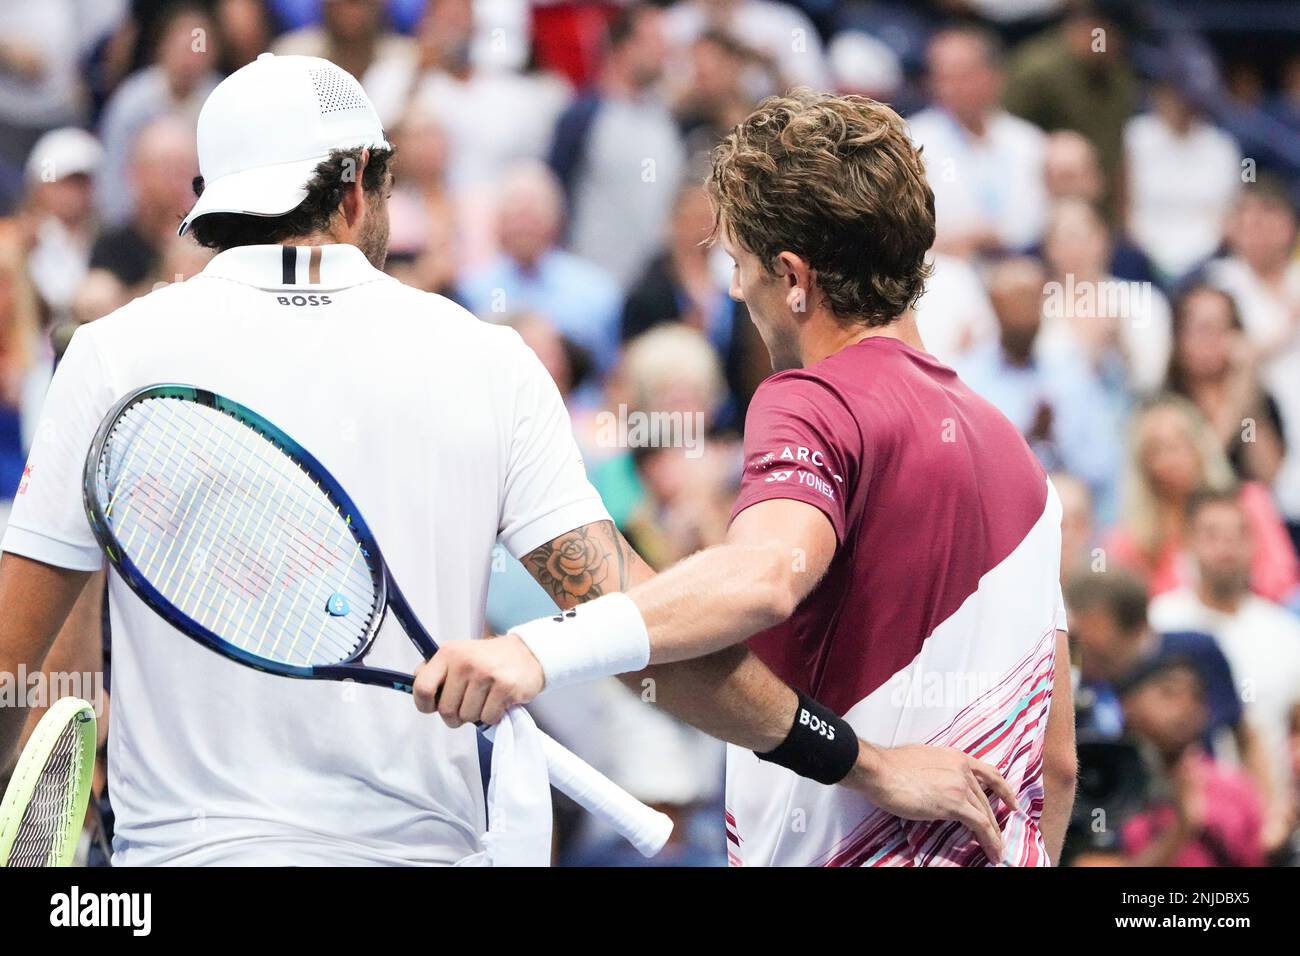 Casper Ruud and Matteo Berrettini after a mens singles quarterfinal match at the 2022 US Open, Tuesday, Sep